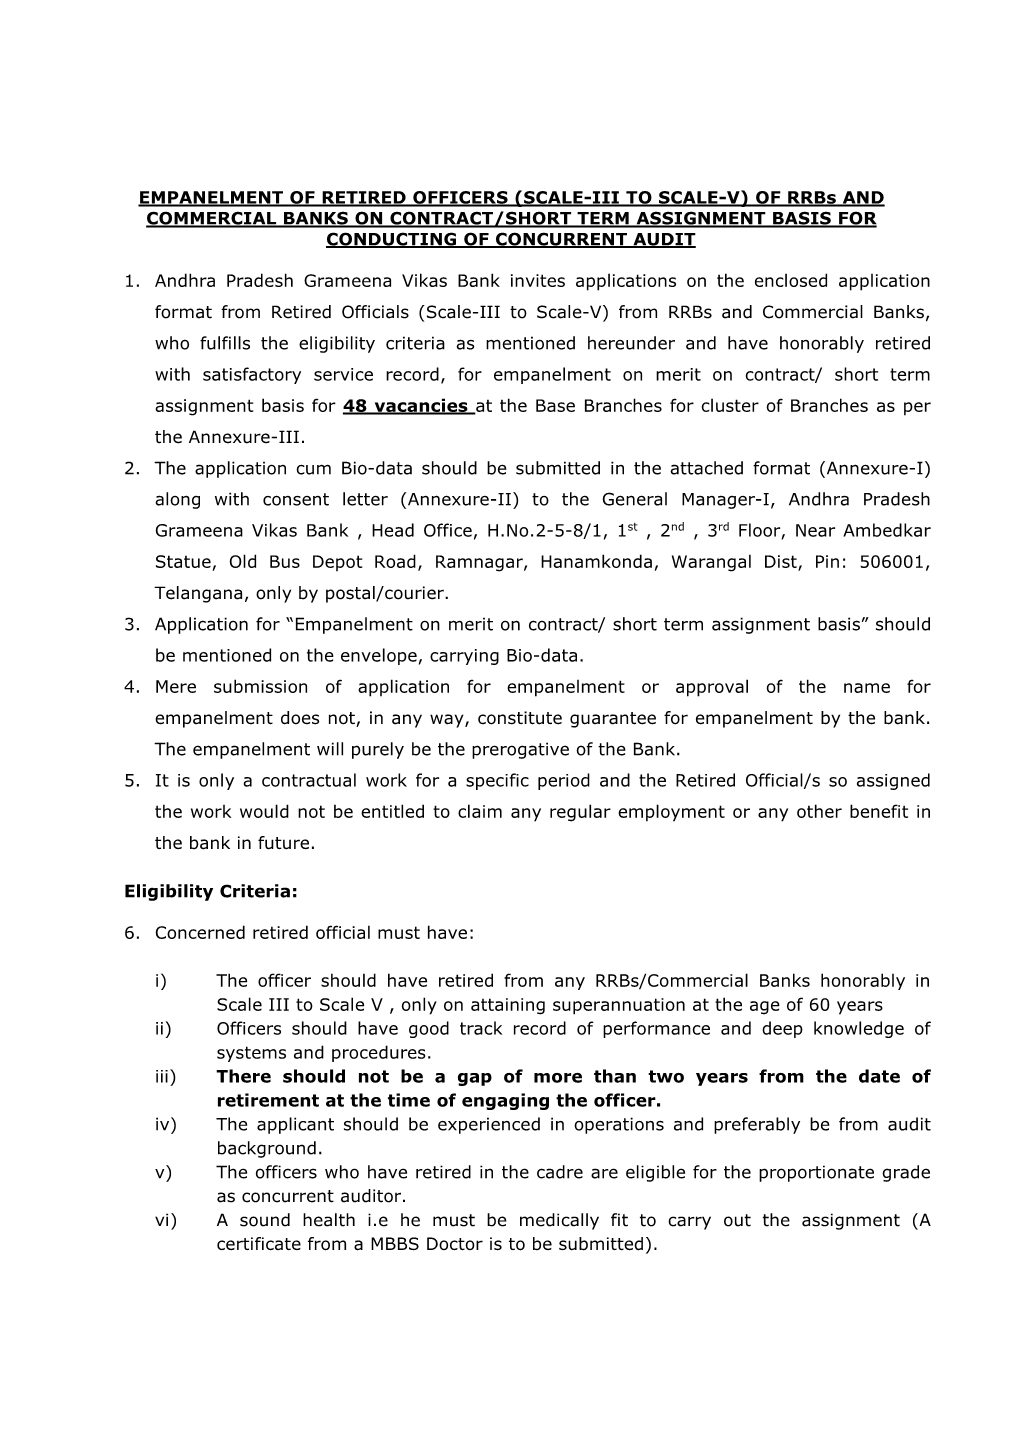 EMPANELMENT of RETIRED OFFICERS (SCALE-III to SCALE-V) of Rrbs and COMMERCIAL BANKS on CONTRACT/SHORT TERM ASSIGNMENT BASIS for CONDUCTING of CONCURRENT AUDIT